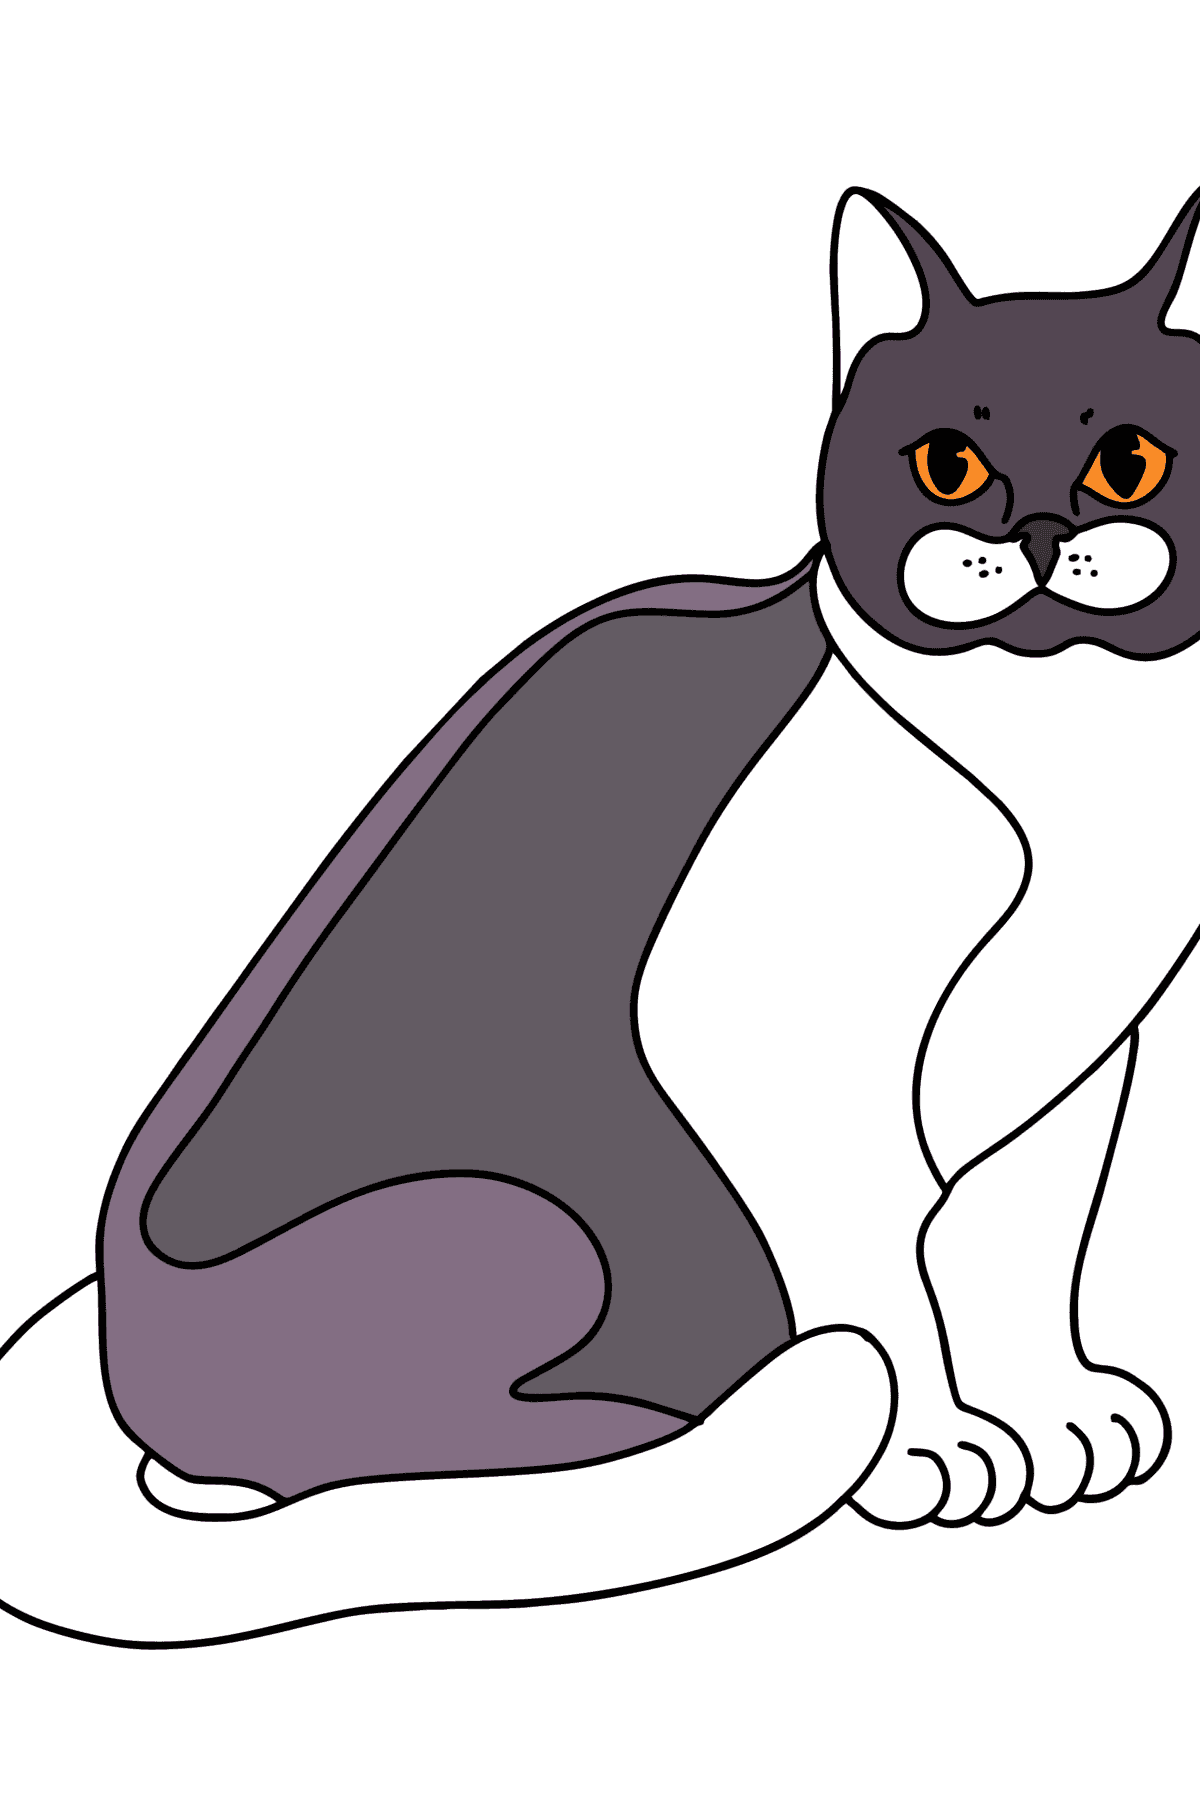 Bombay Cat coloring page - Coloring Pages for Kids